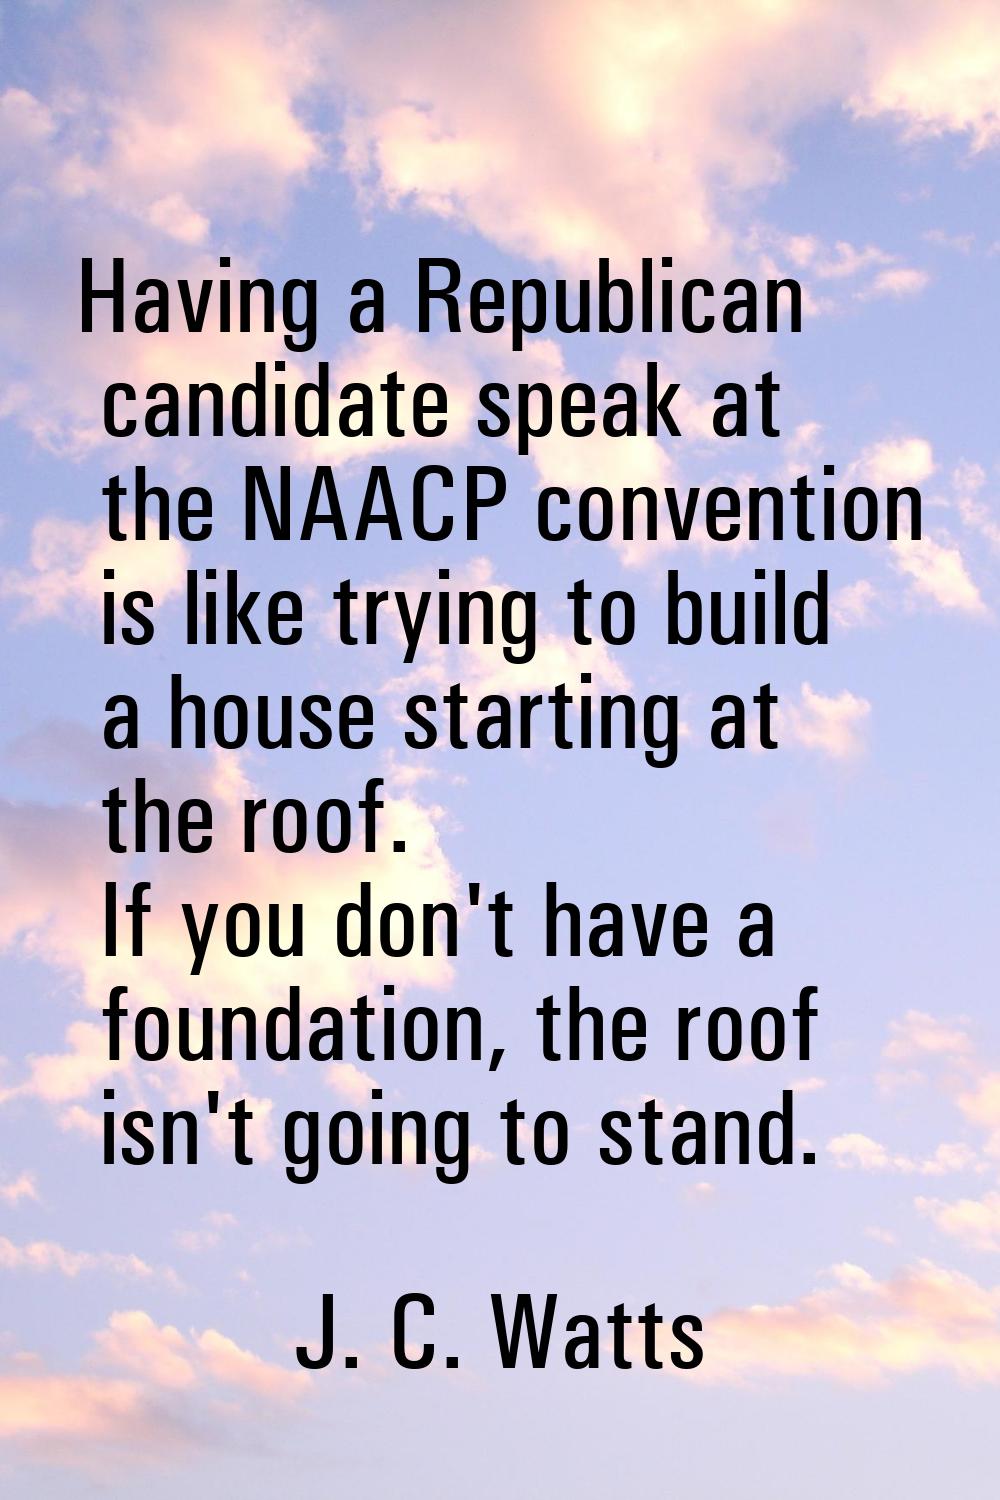 Having a Republican candidate speak at the NAACP convention is like trying to build a house startin